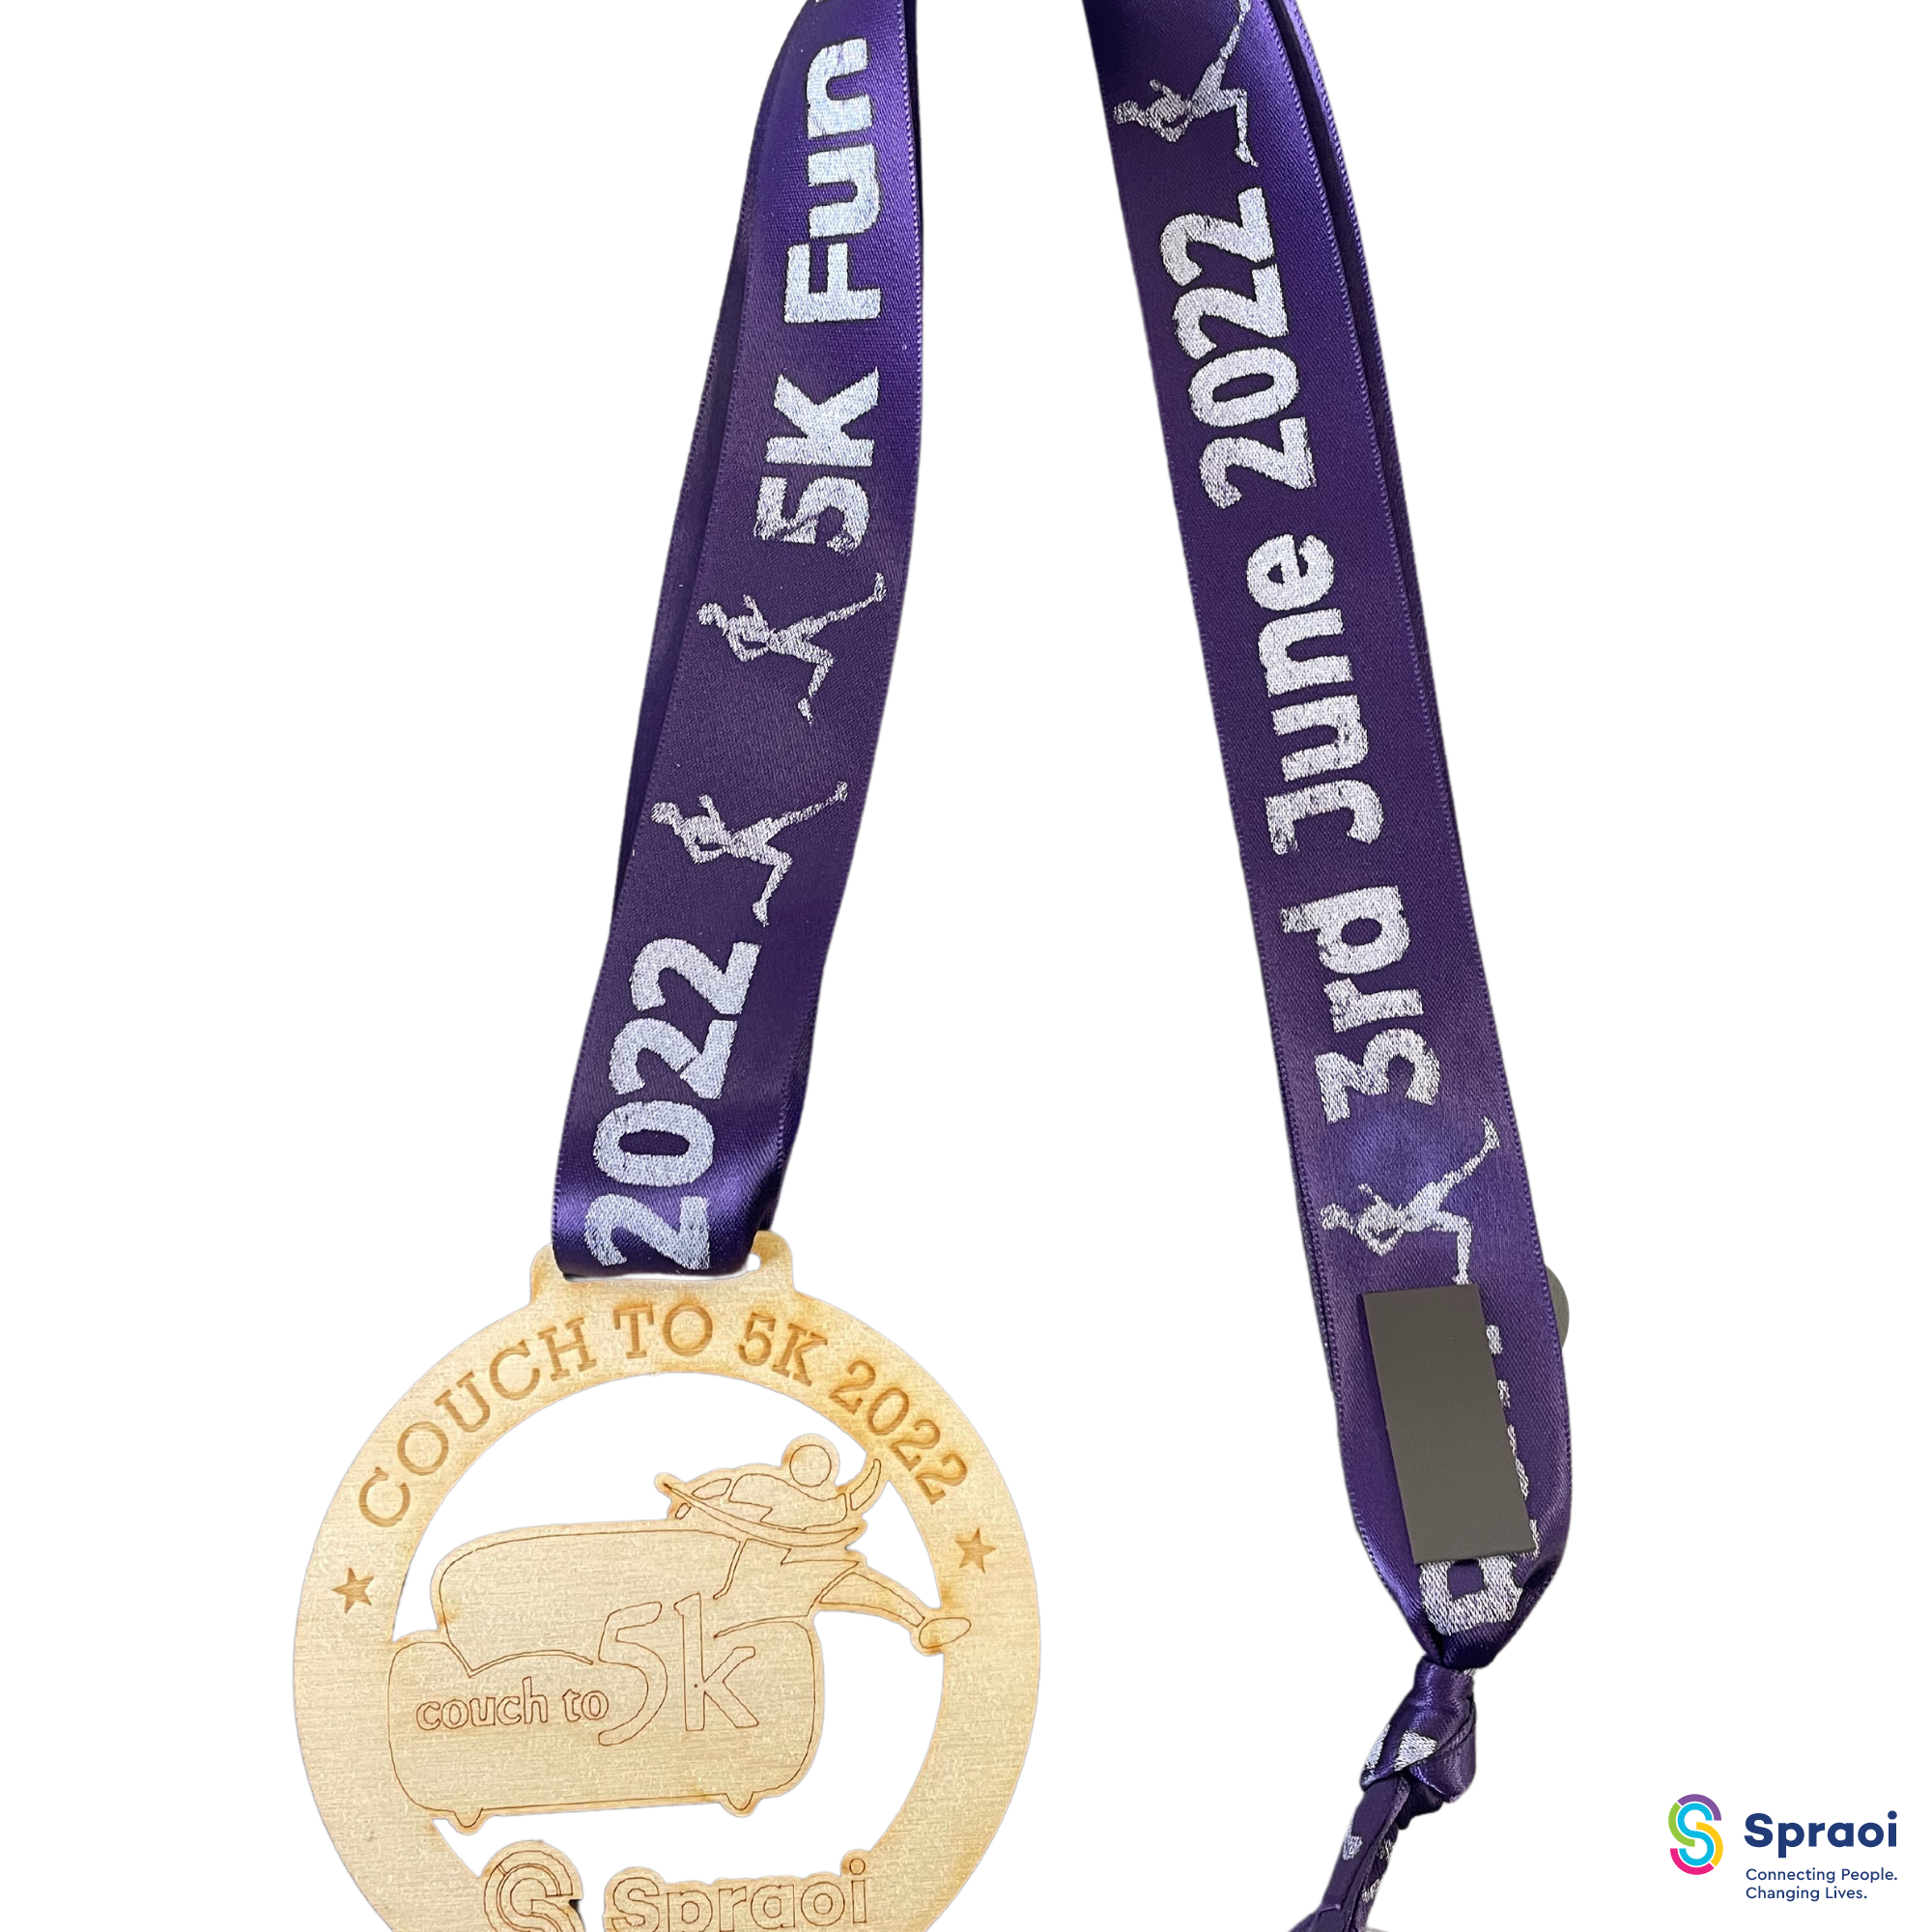 Couch to 5k Wooden Medal